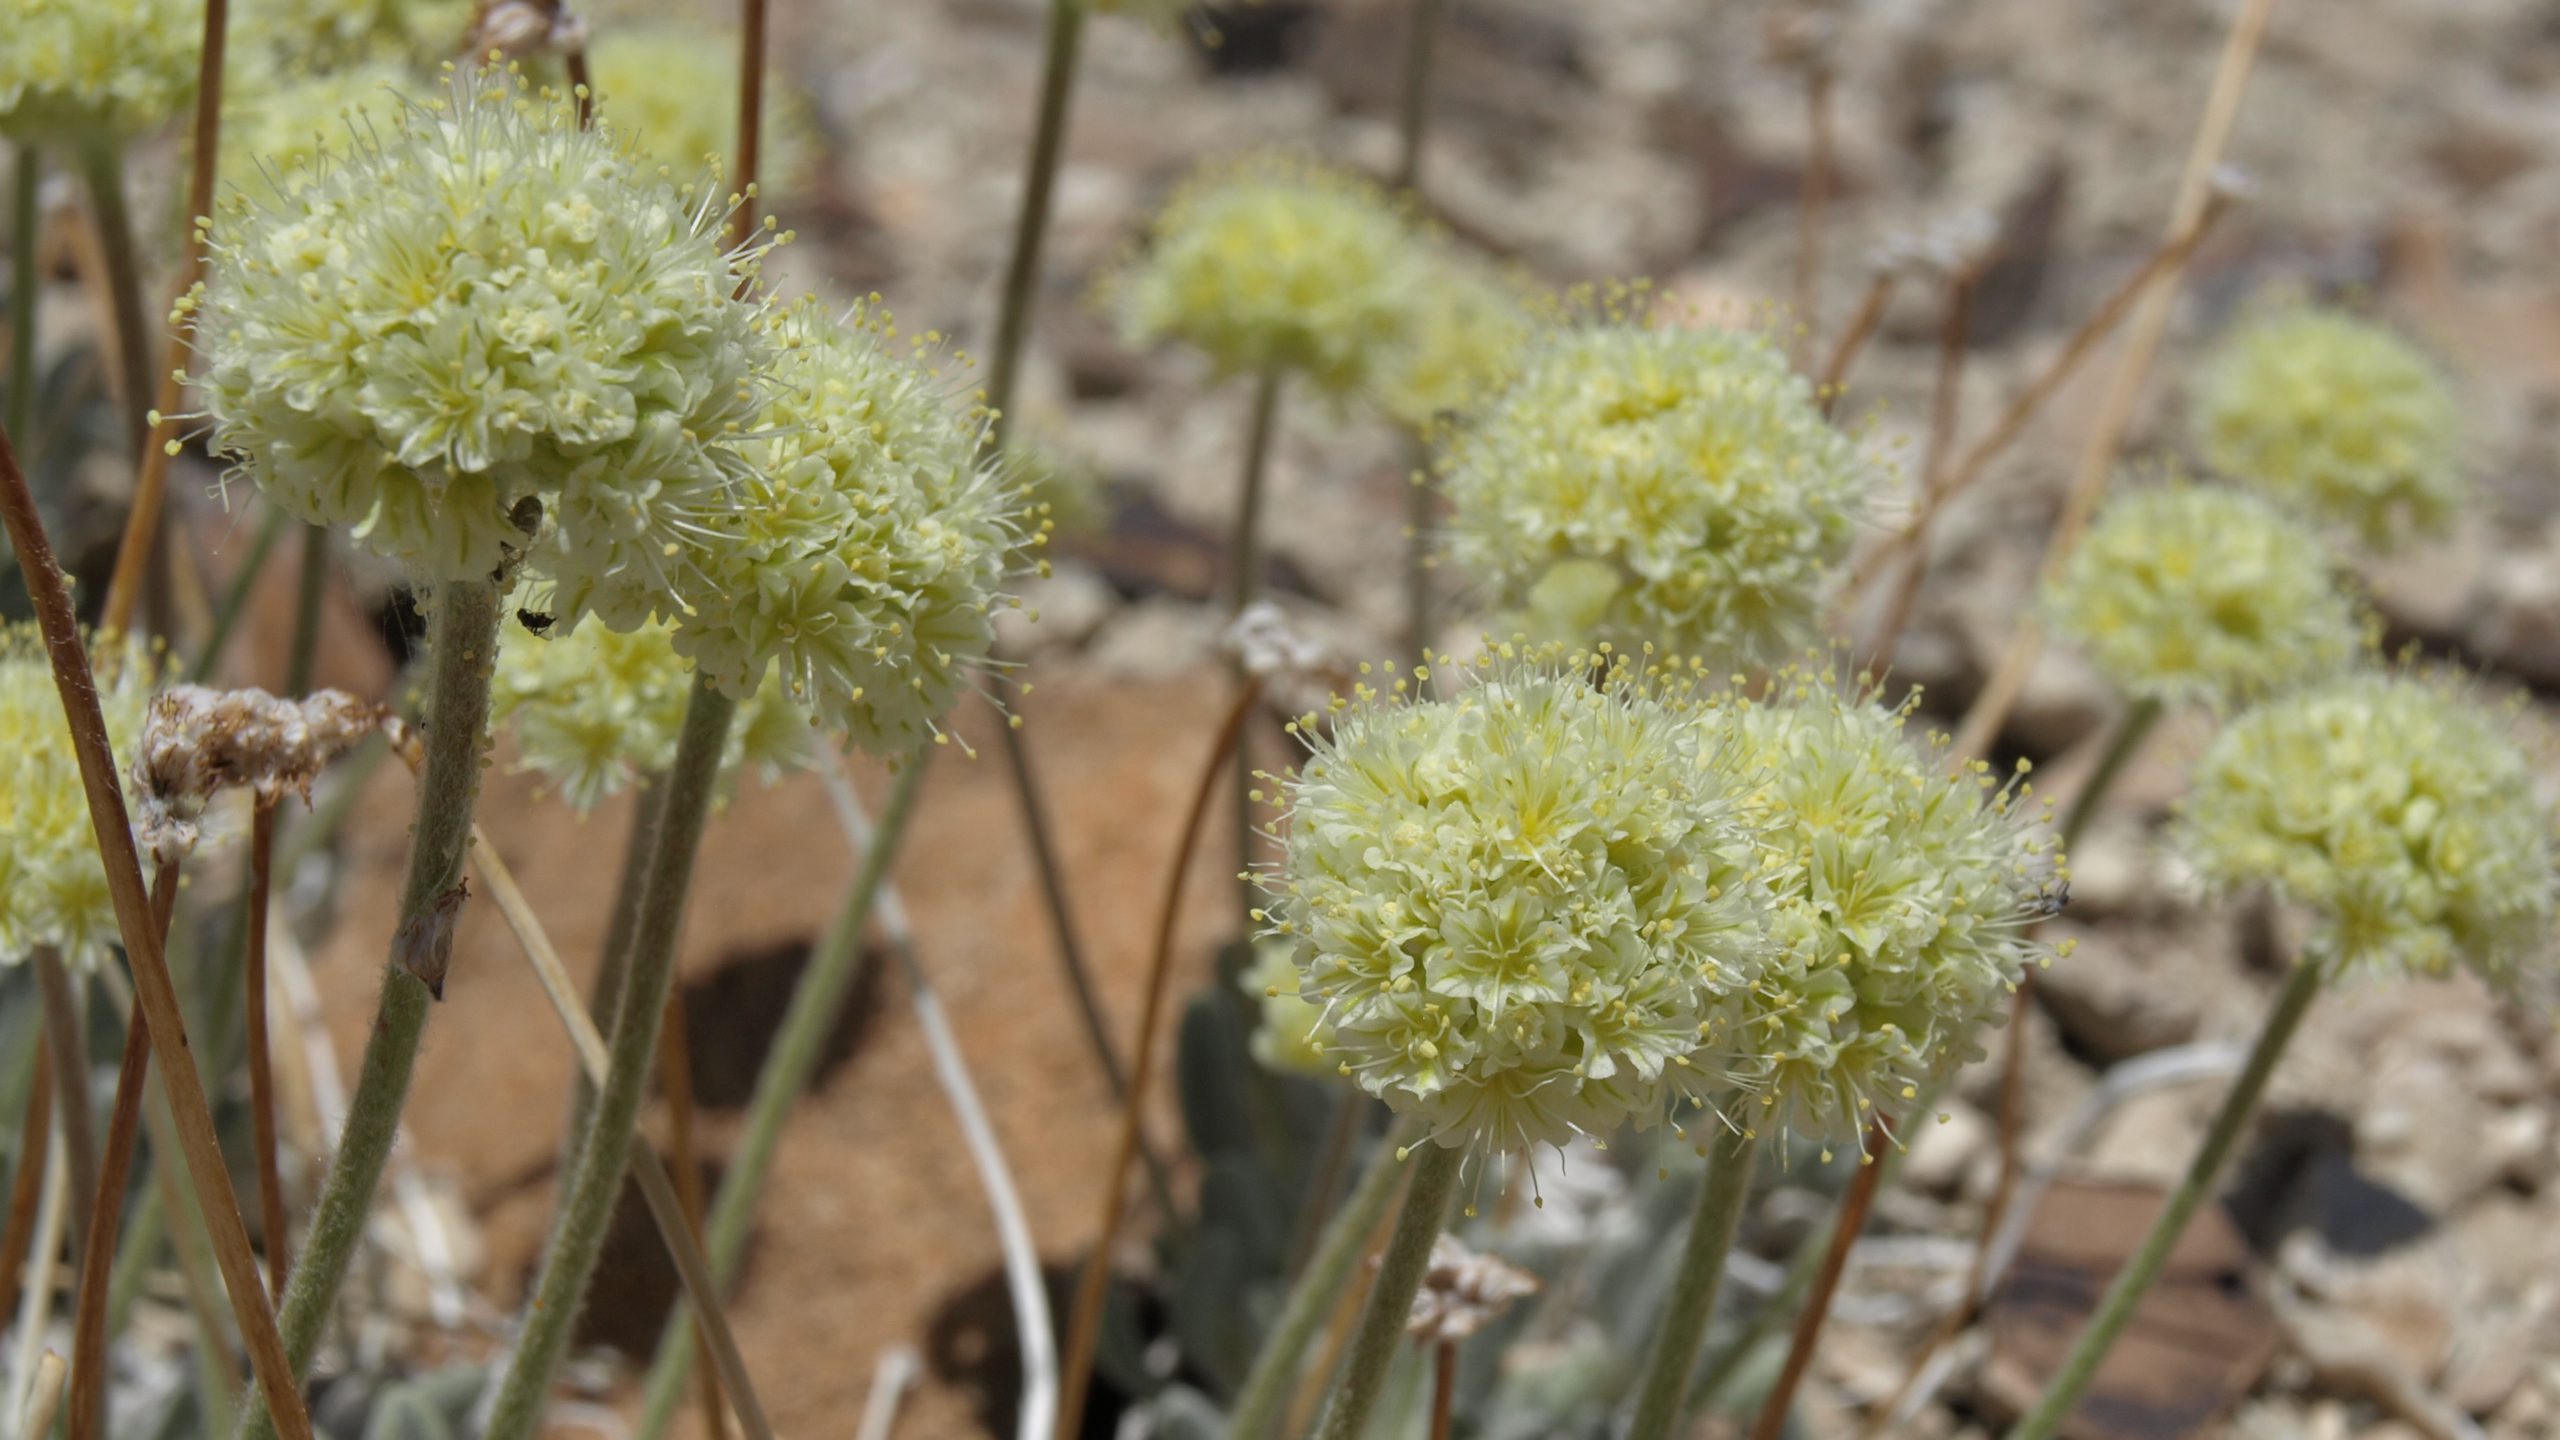 US officials to list Nevada flower as endangered, dealing blow to ioneer